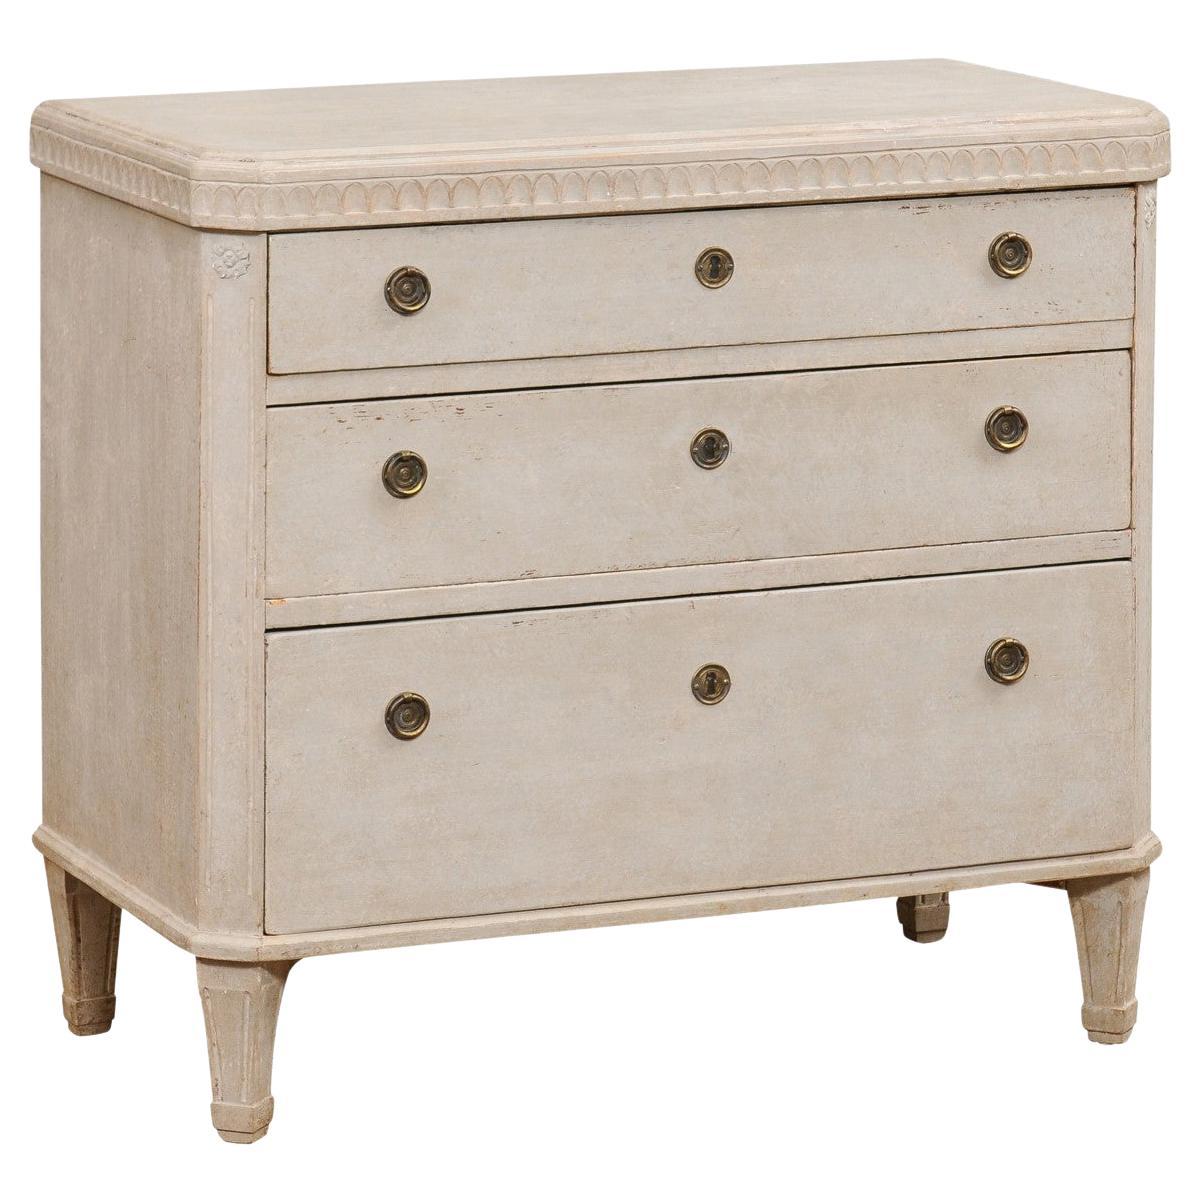 Swedish Gustavian Style 1840s Painted Three-Drawer Chest with Carved Frieze